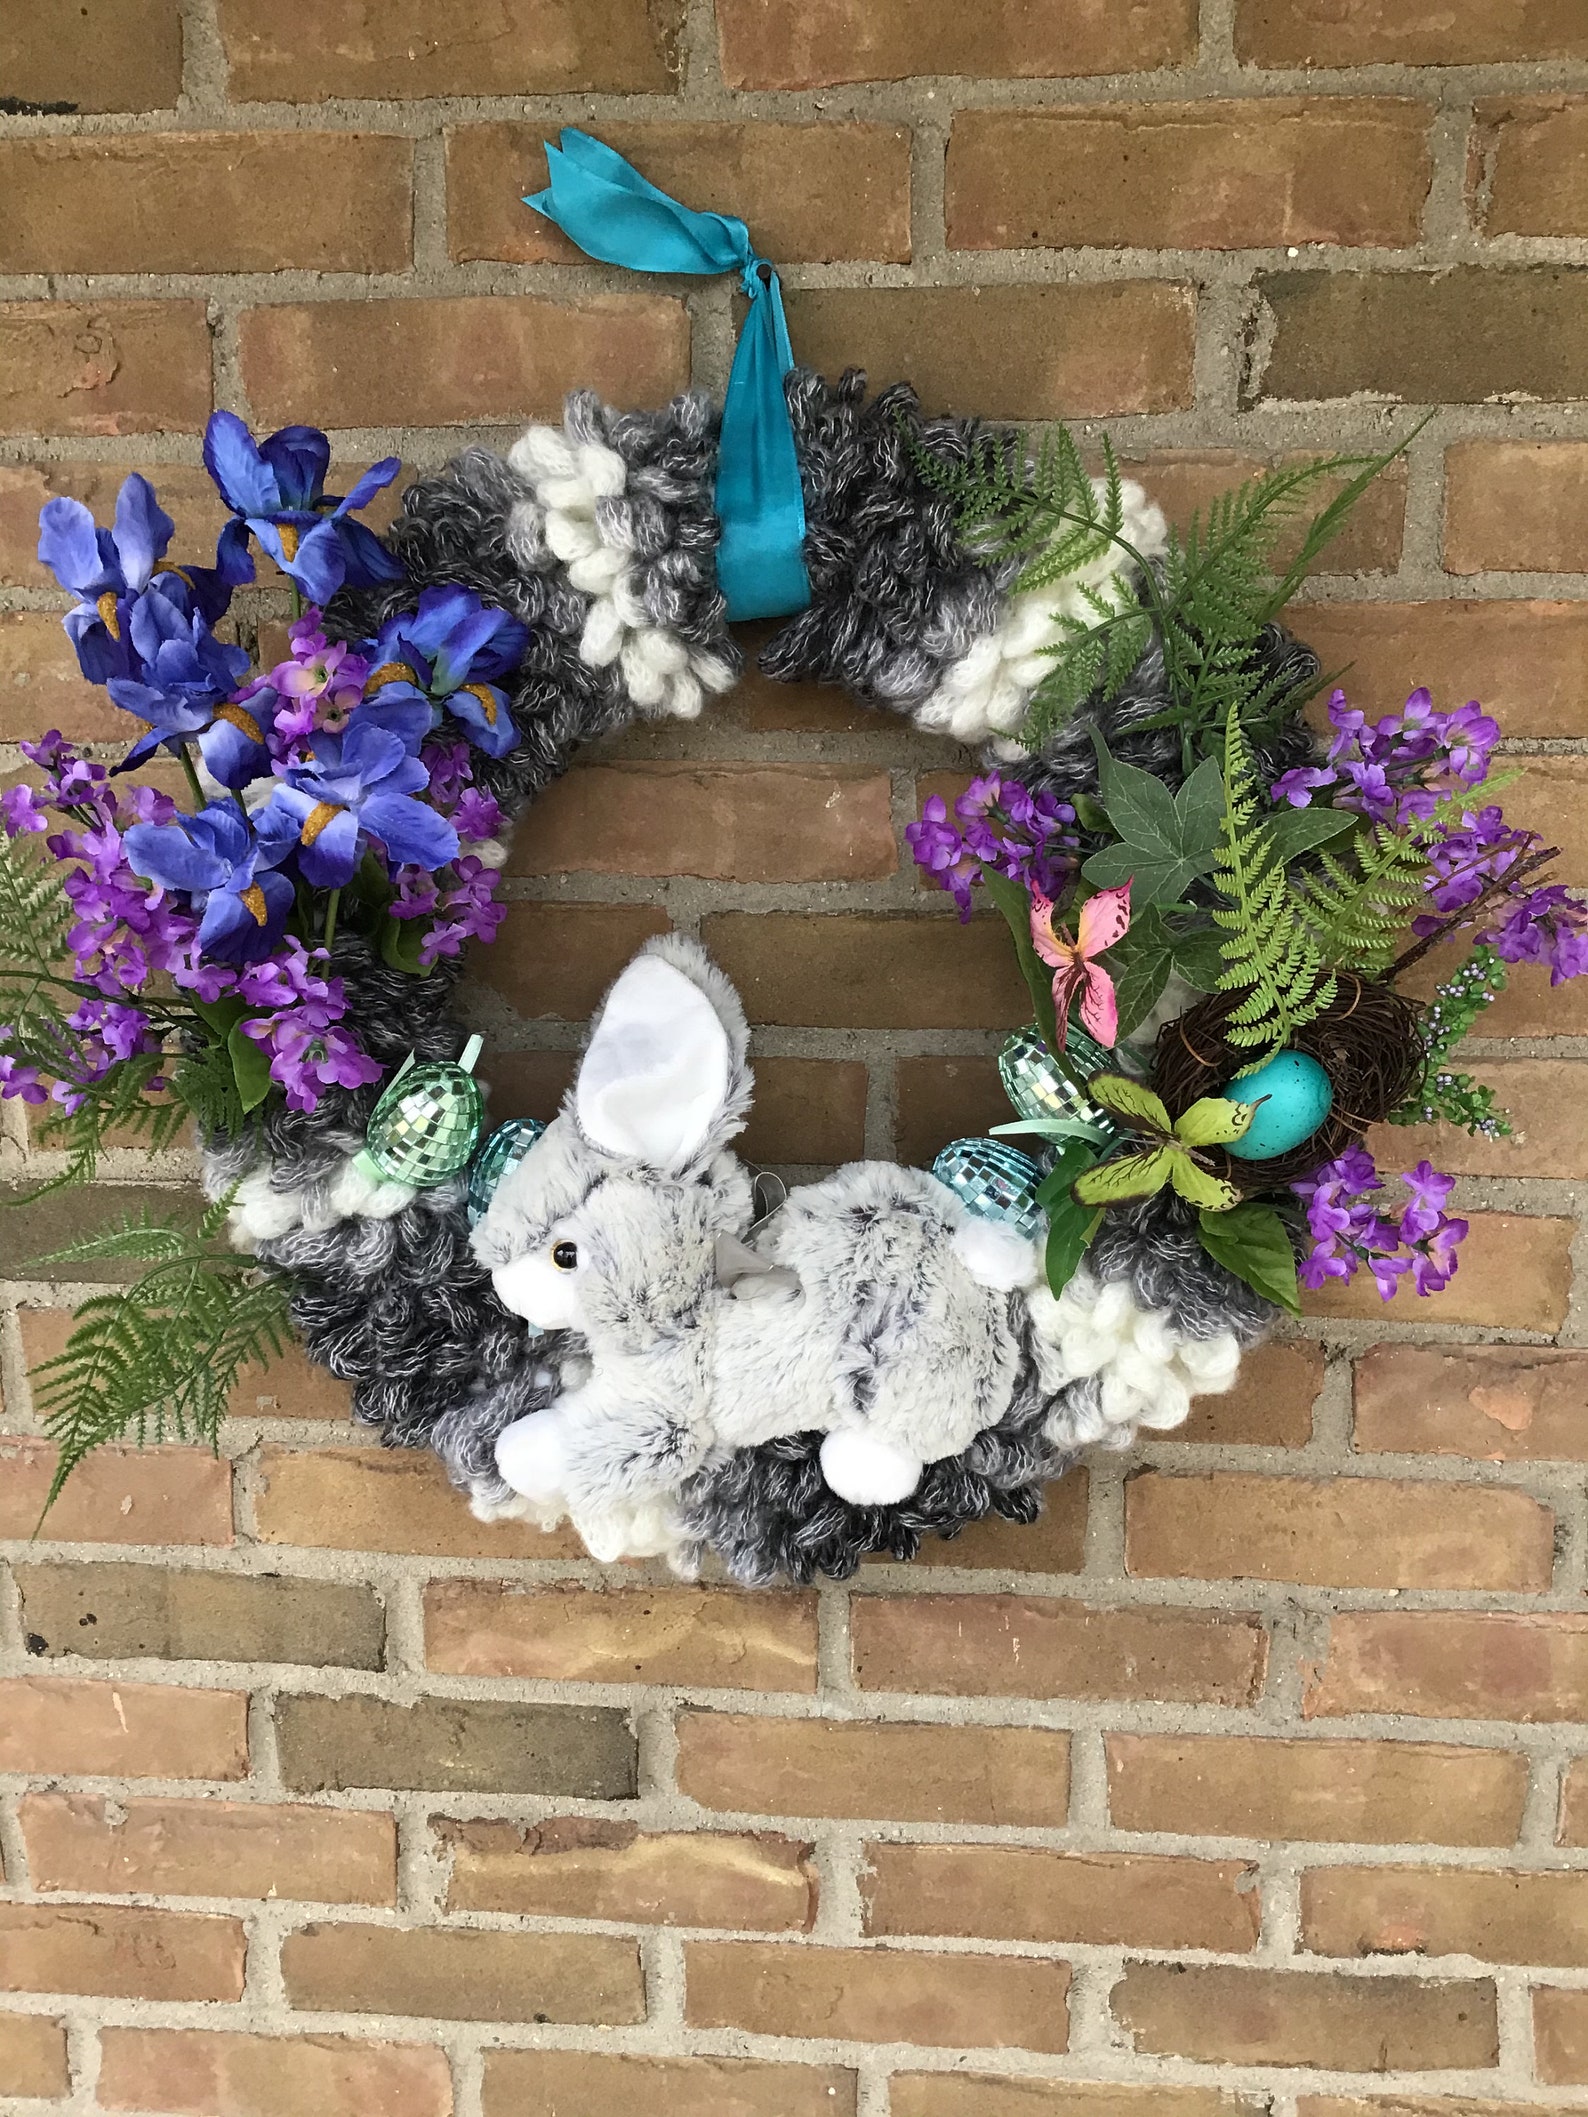 Bunny Yarn Wreaths with Flowers, Greenery and Eggs